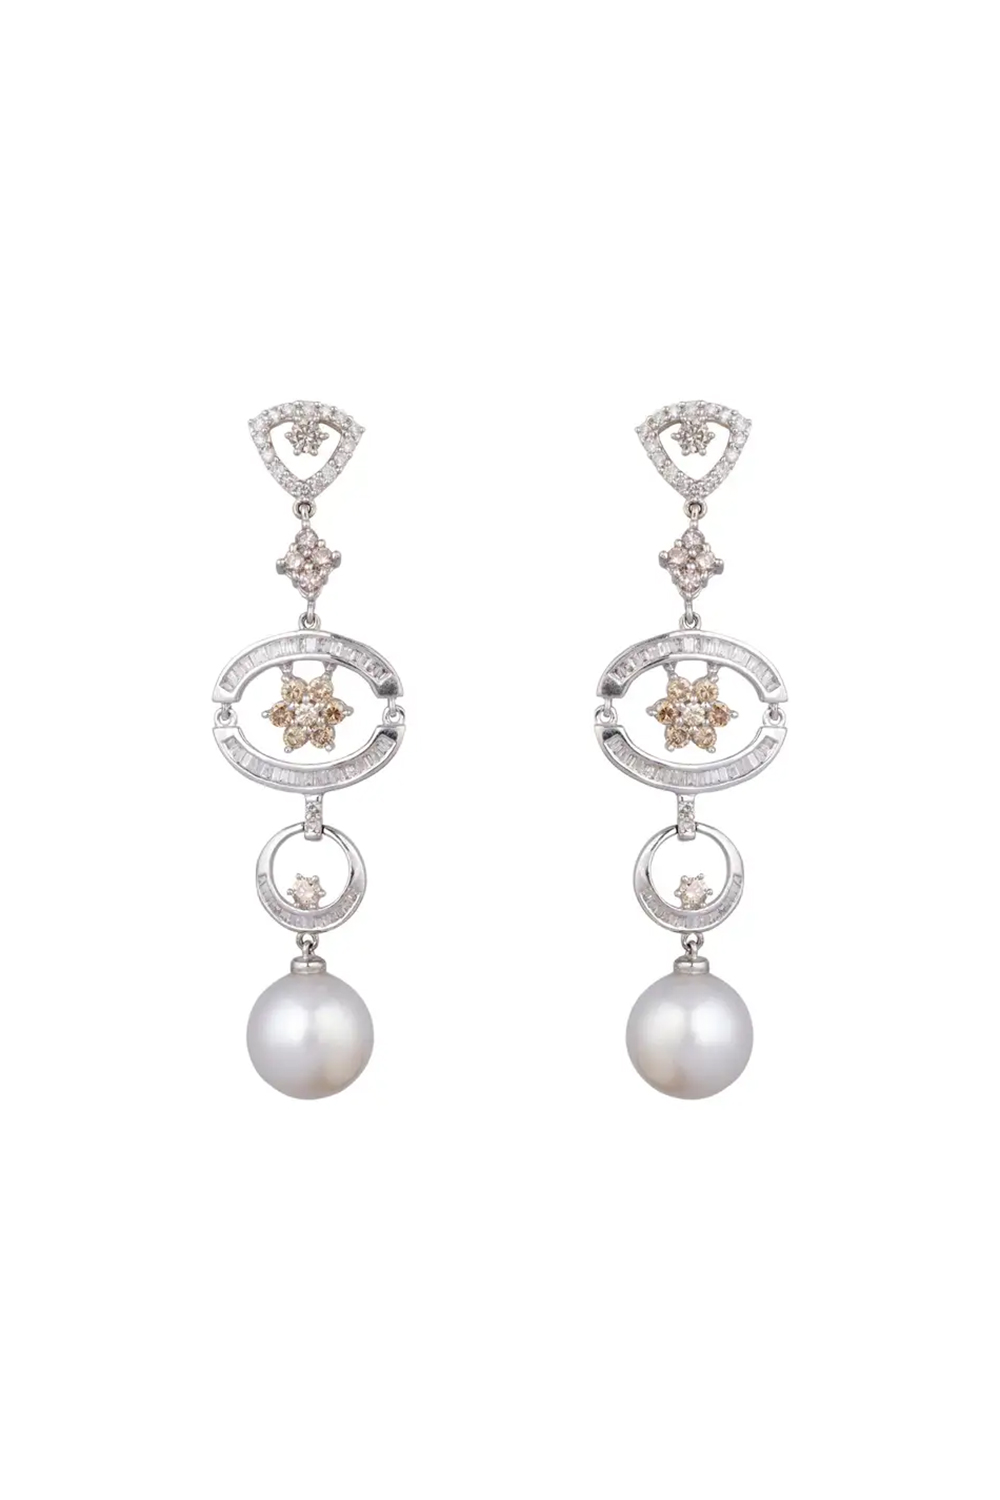 18k gold 2.05cts Diamond and 20.30cts Pearl Earring